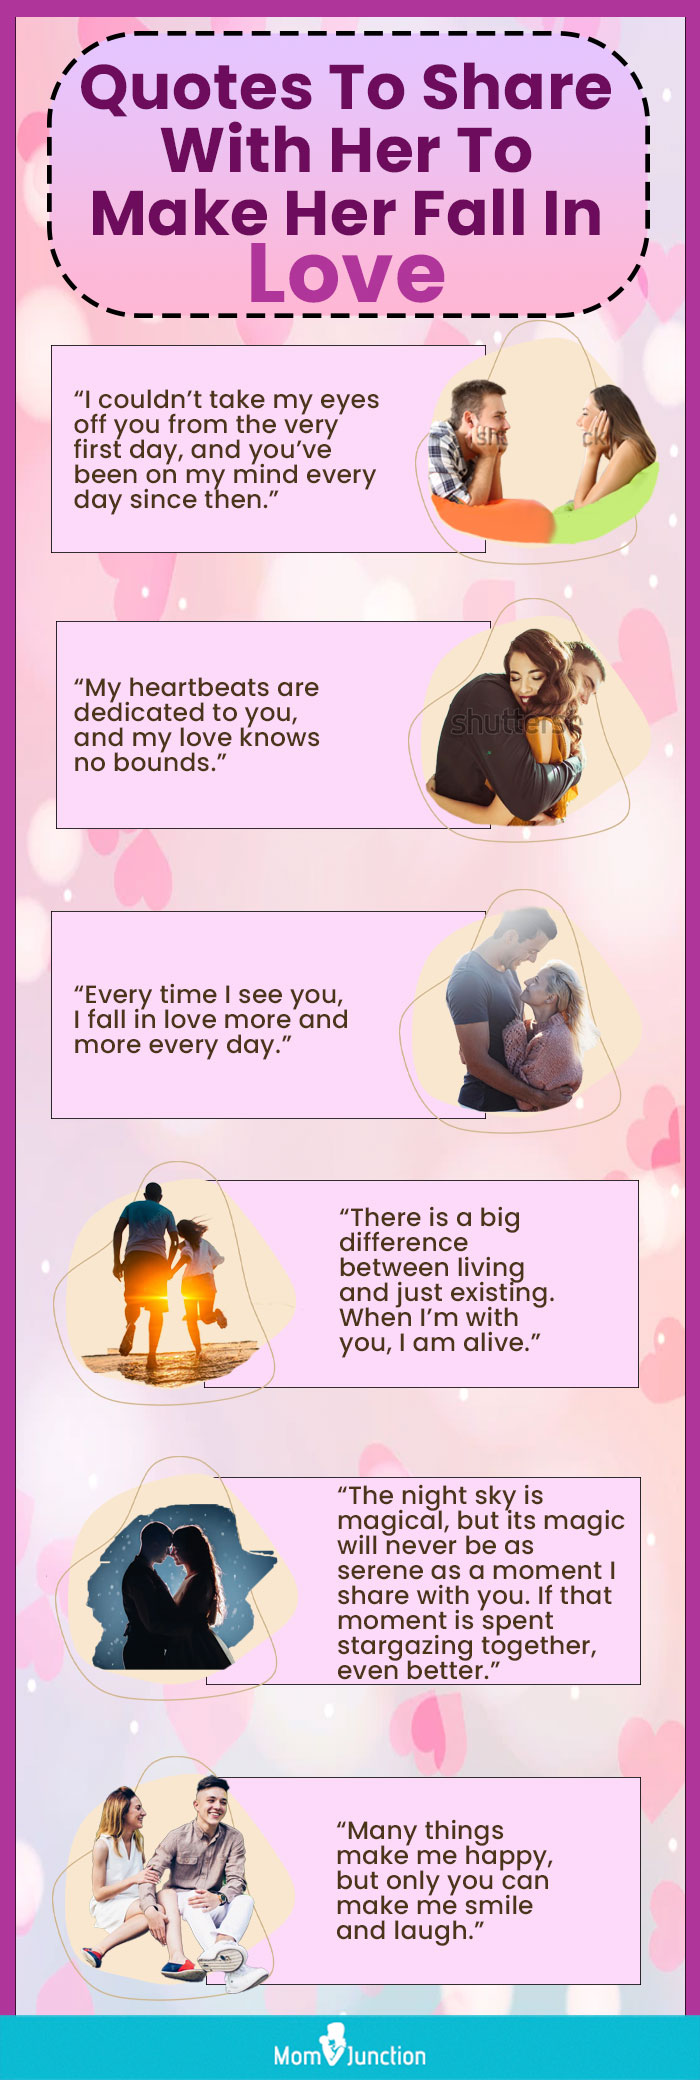 quotes to make her fall in love [infographic]